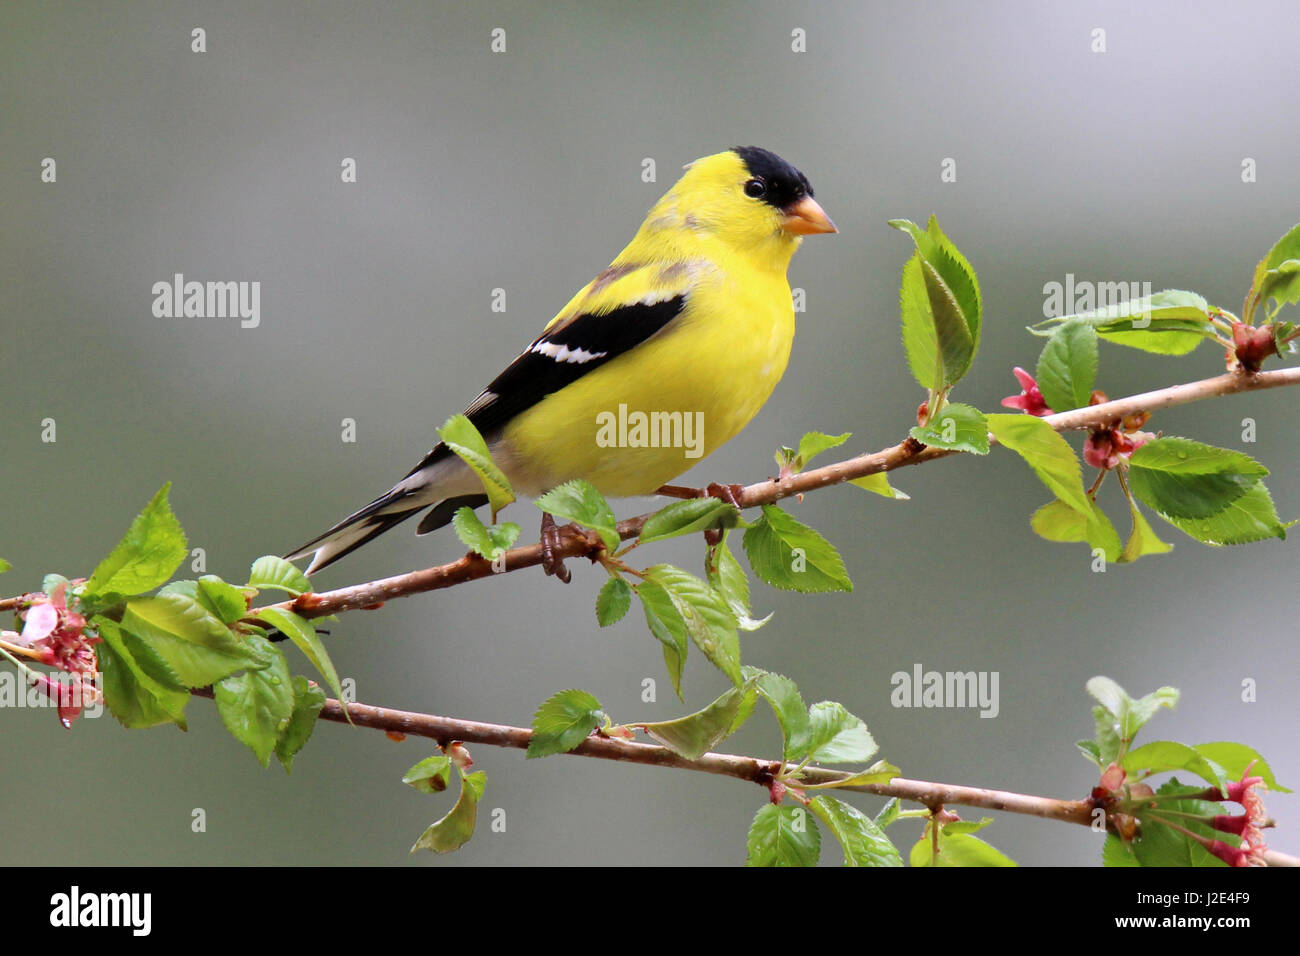 A bright yellow male American goldfinch Carduelis tristis perching on flowering branches in Spring. Stock Photo